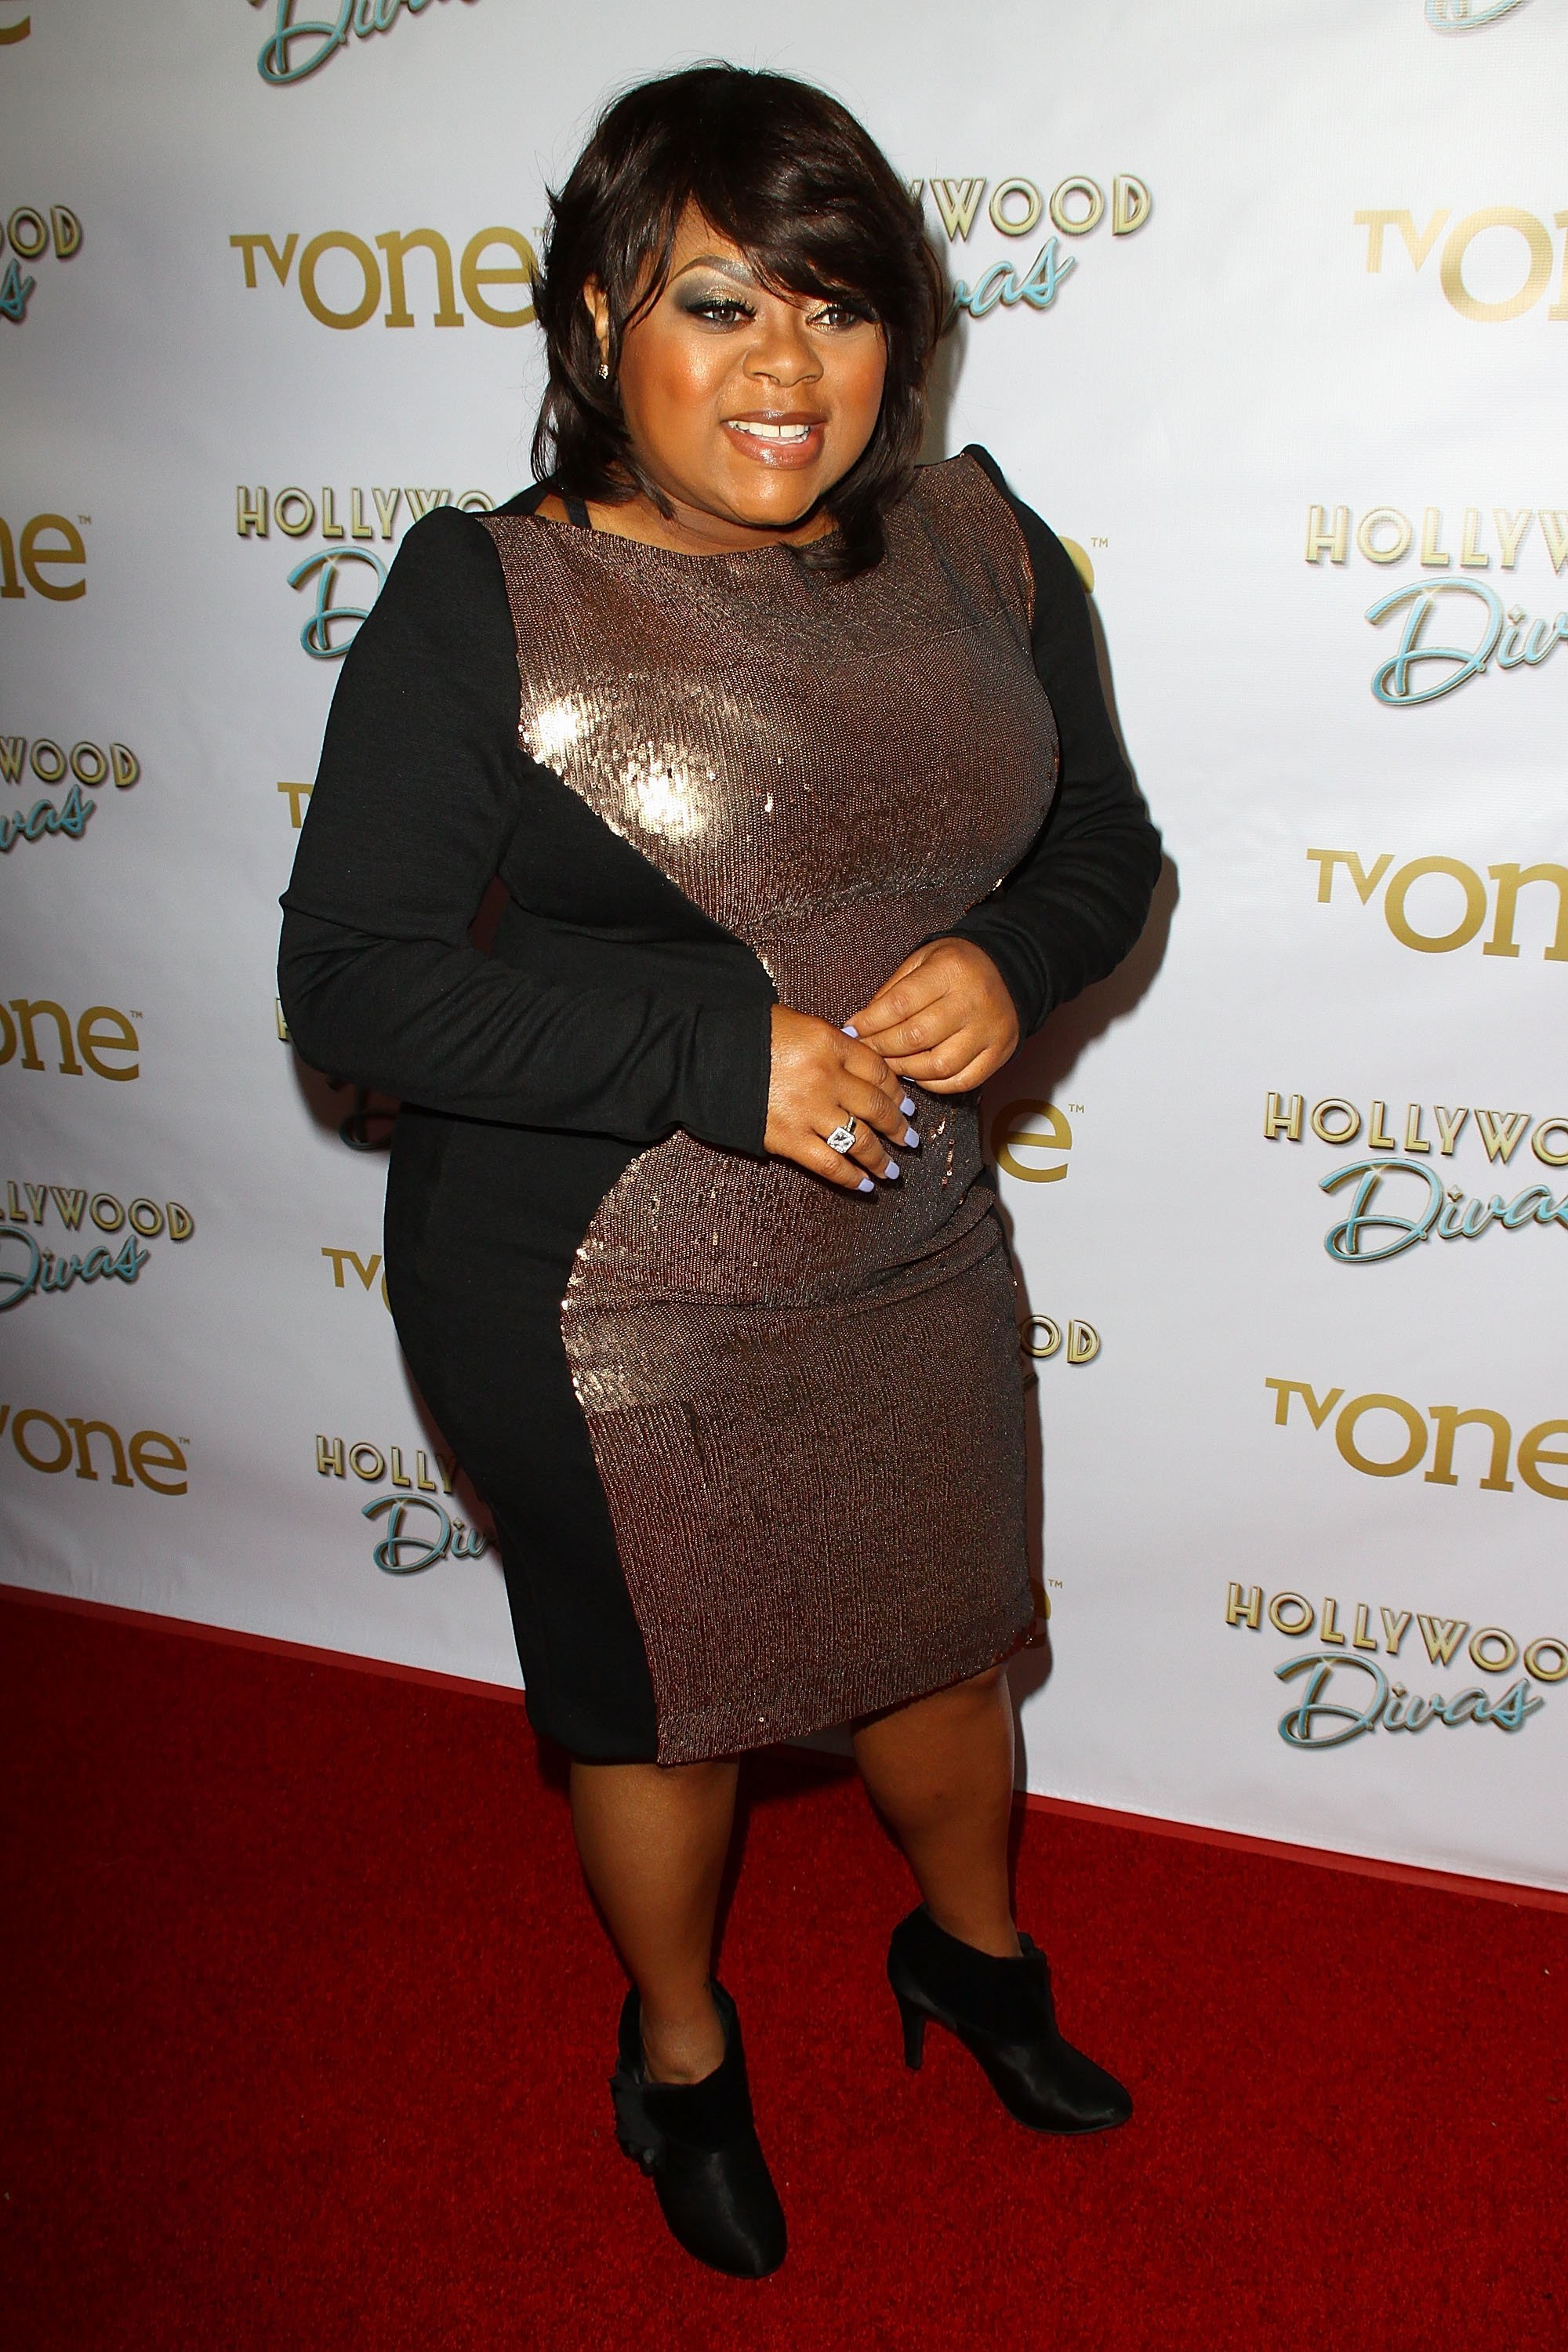 Countess Vaughn attends the premiere party for TV One's 'Hollywood Divas' at OHM Nightclub on October 7, 2014 | Photo: GettyImages